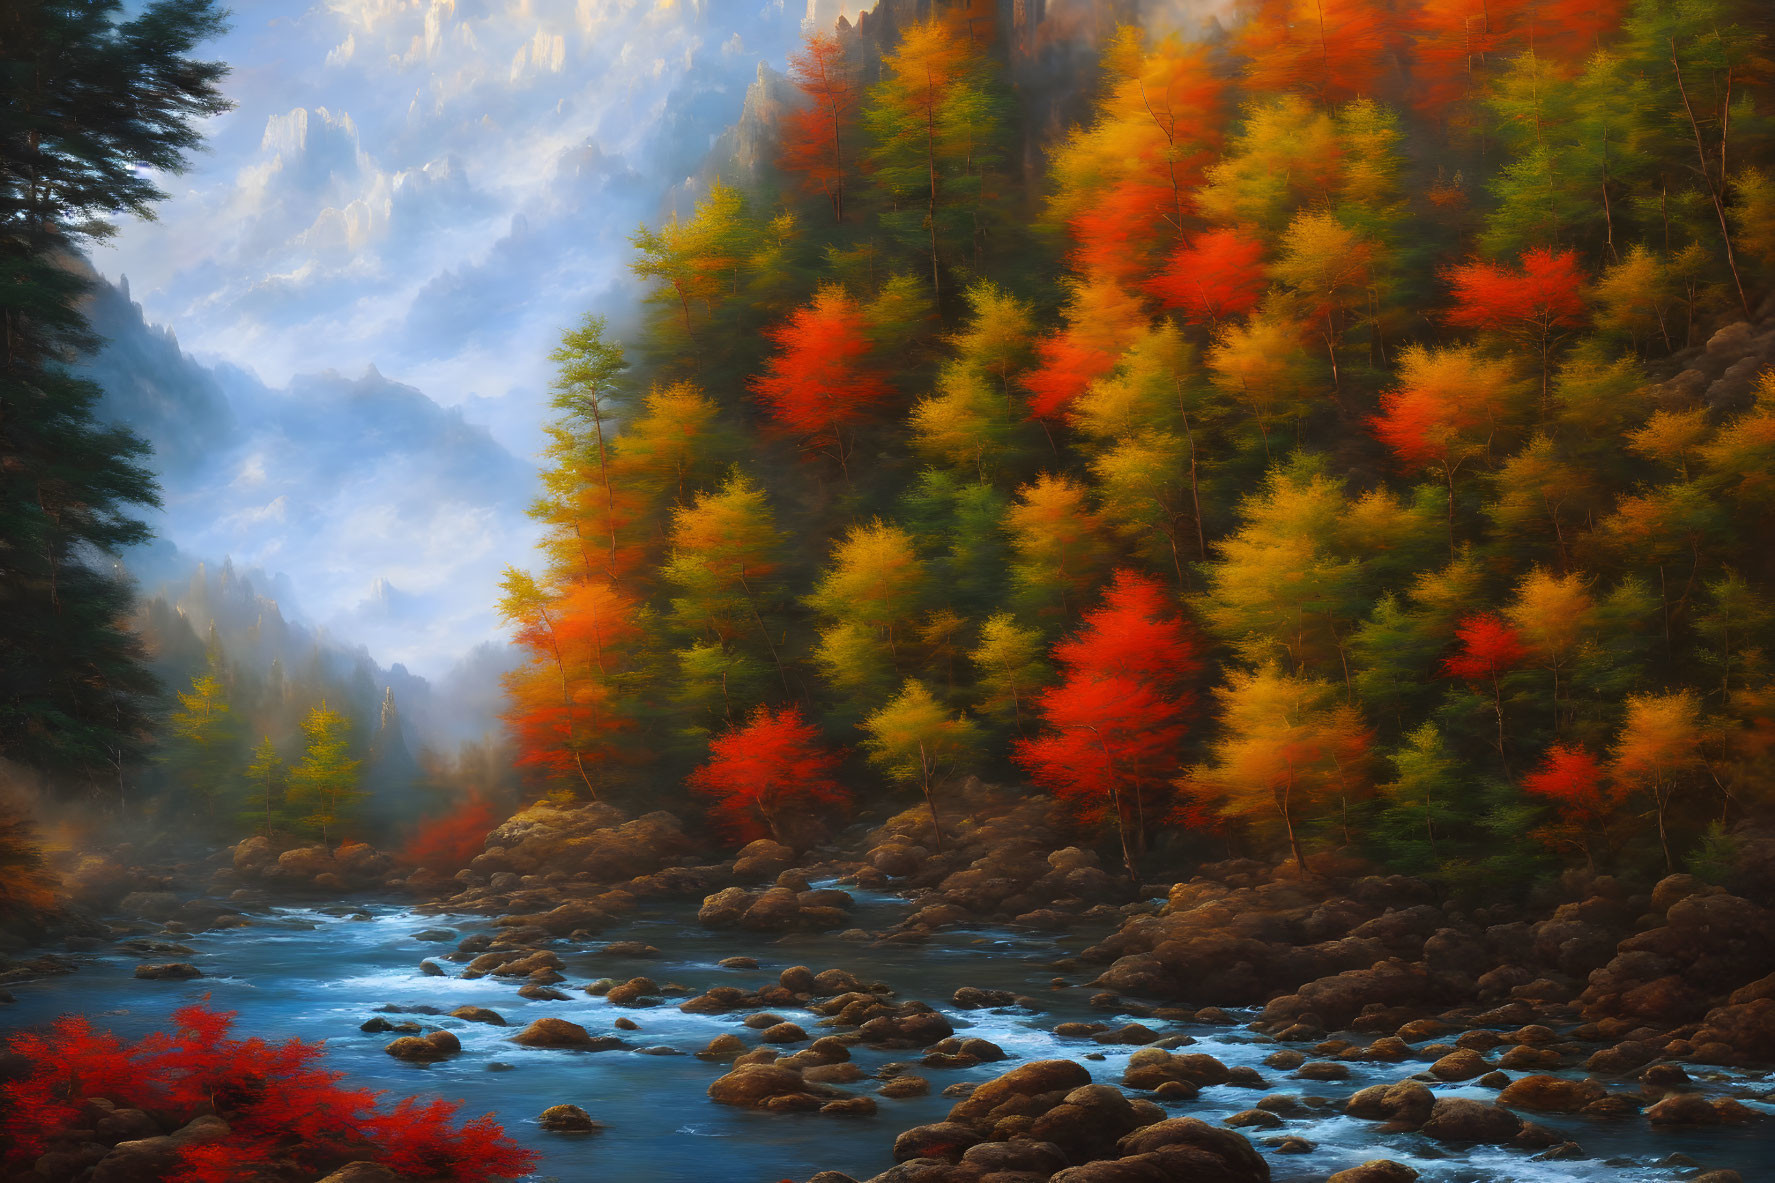 Vibrant autumn forest with red and orange trees near rocky stream